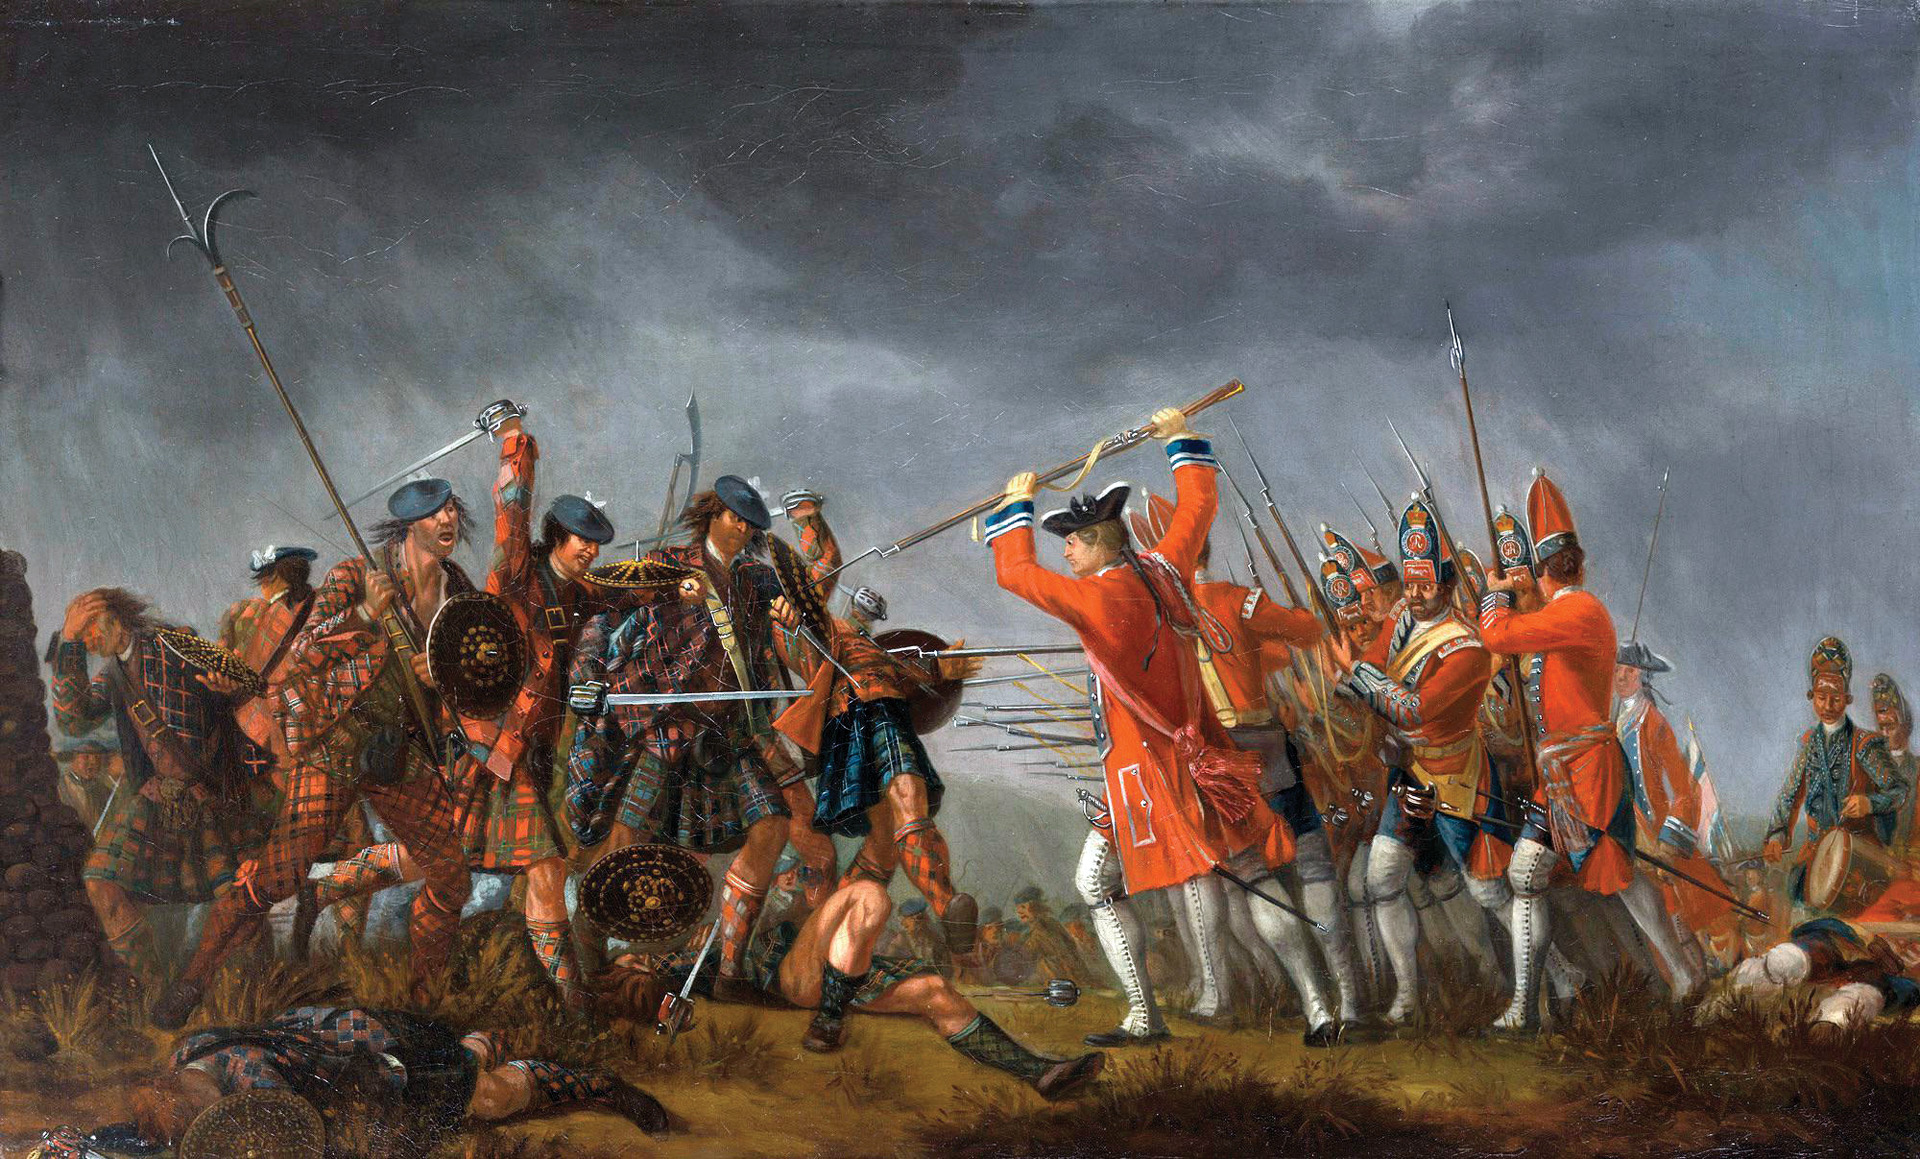 The socket bayonet enabled British troops at Culloden to defeat Scottish rebels armed with broadswords at close quarters.